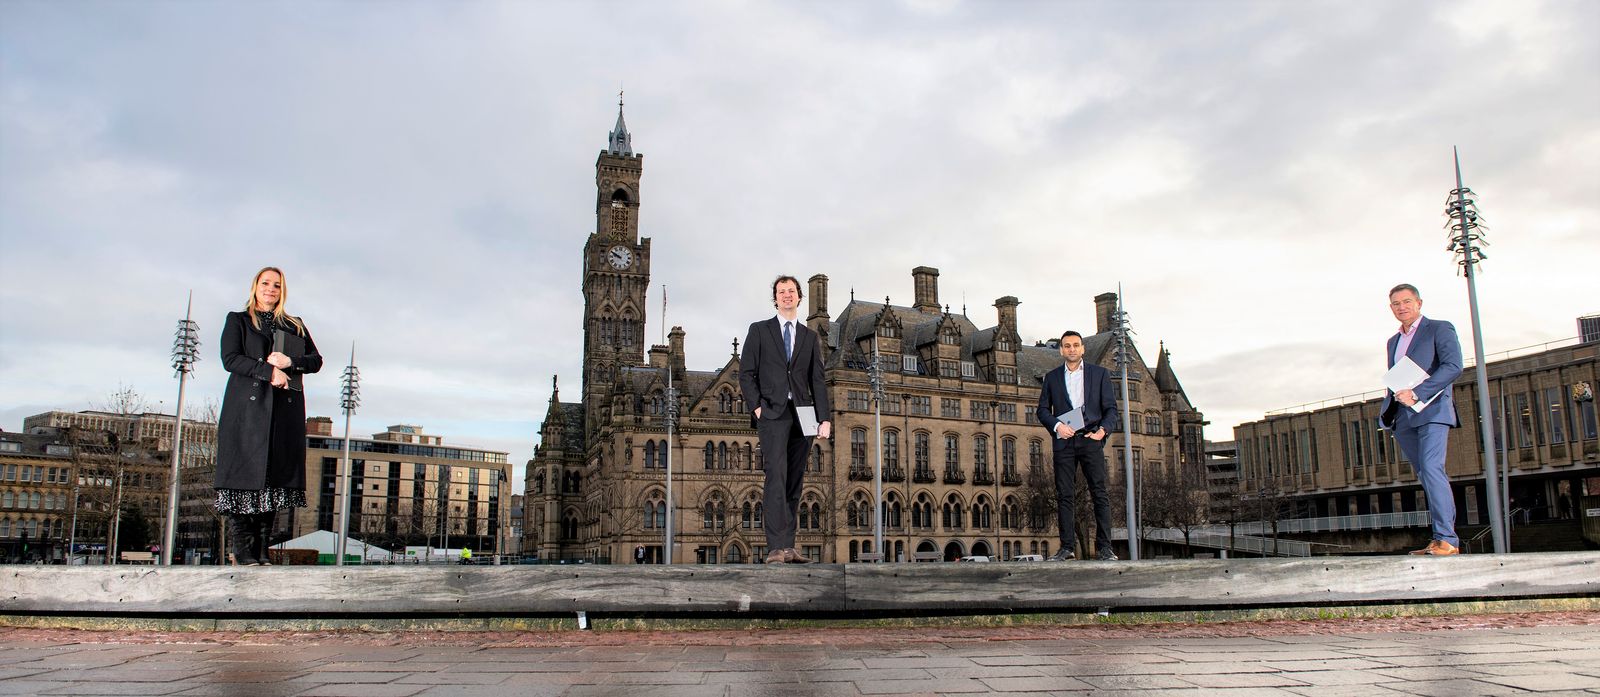 Bradford entrepreneurs urged to accelerate their business plans